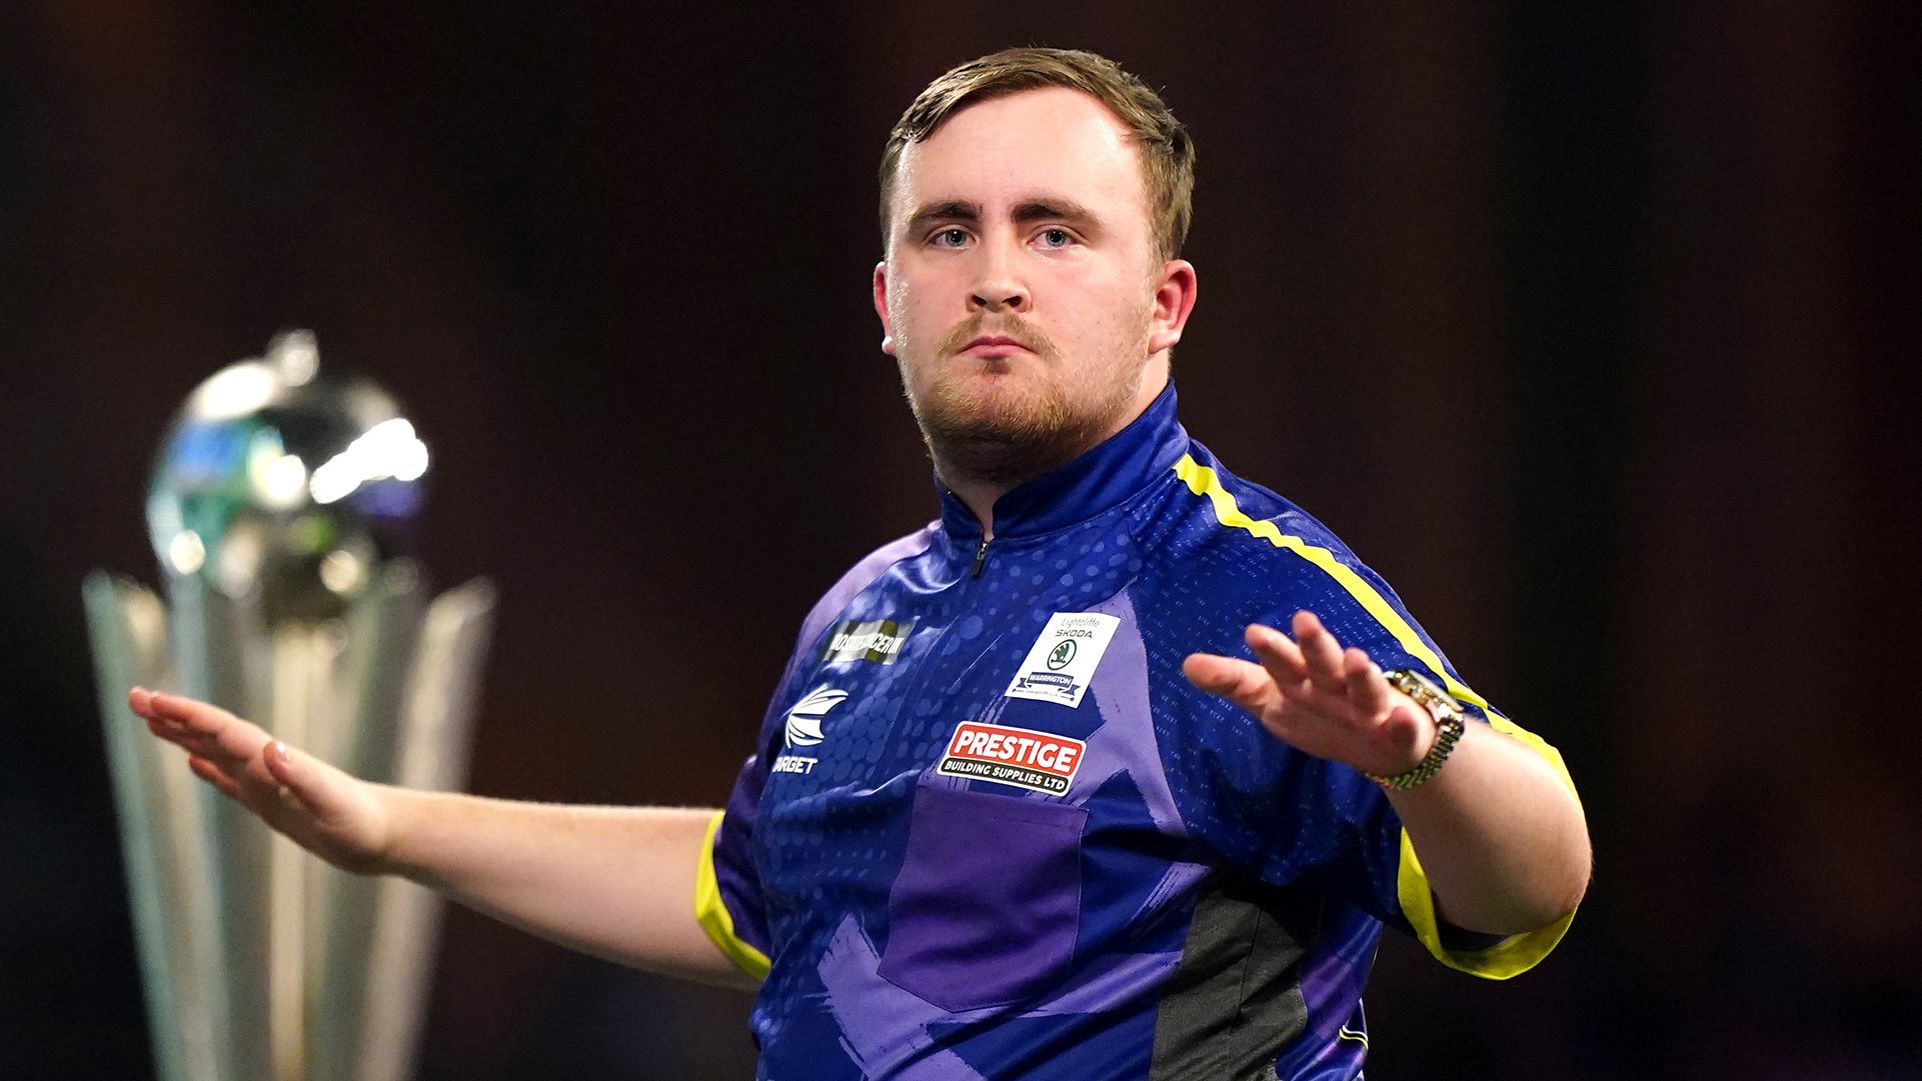 'Incredible' Luke Littler, 16, loses World Darts Championship final to end 'unbelievable' run